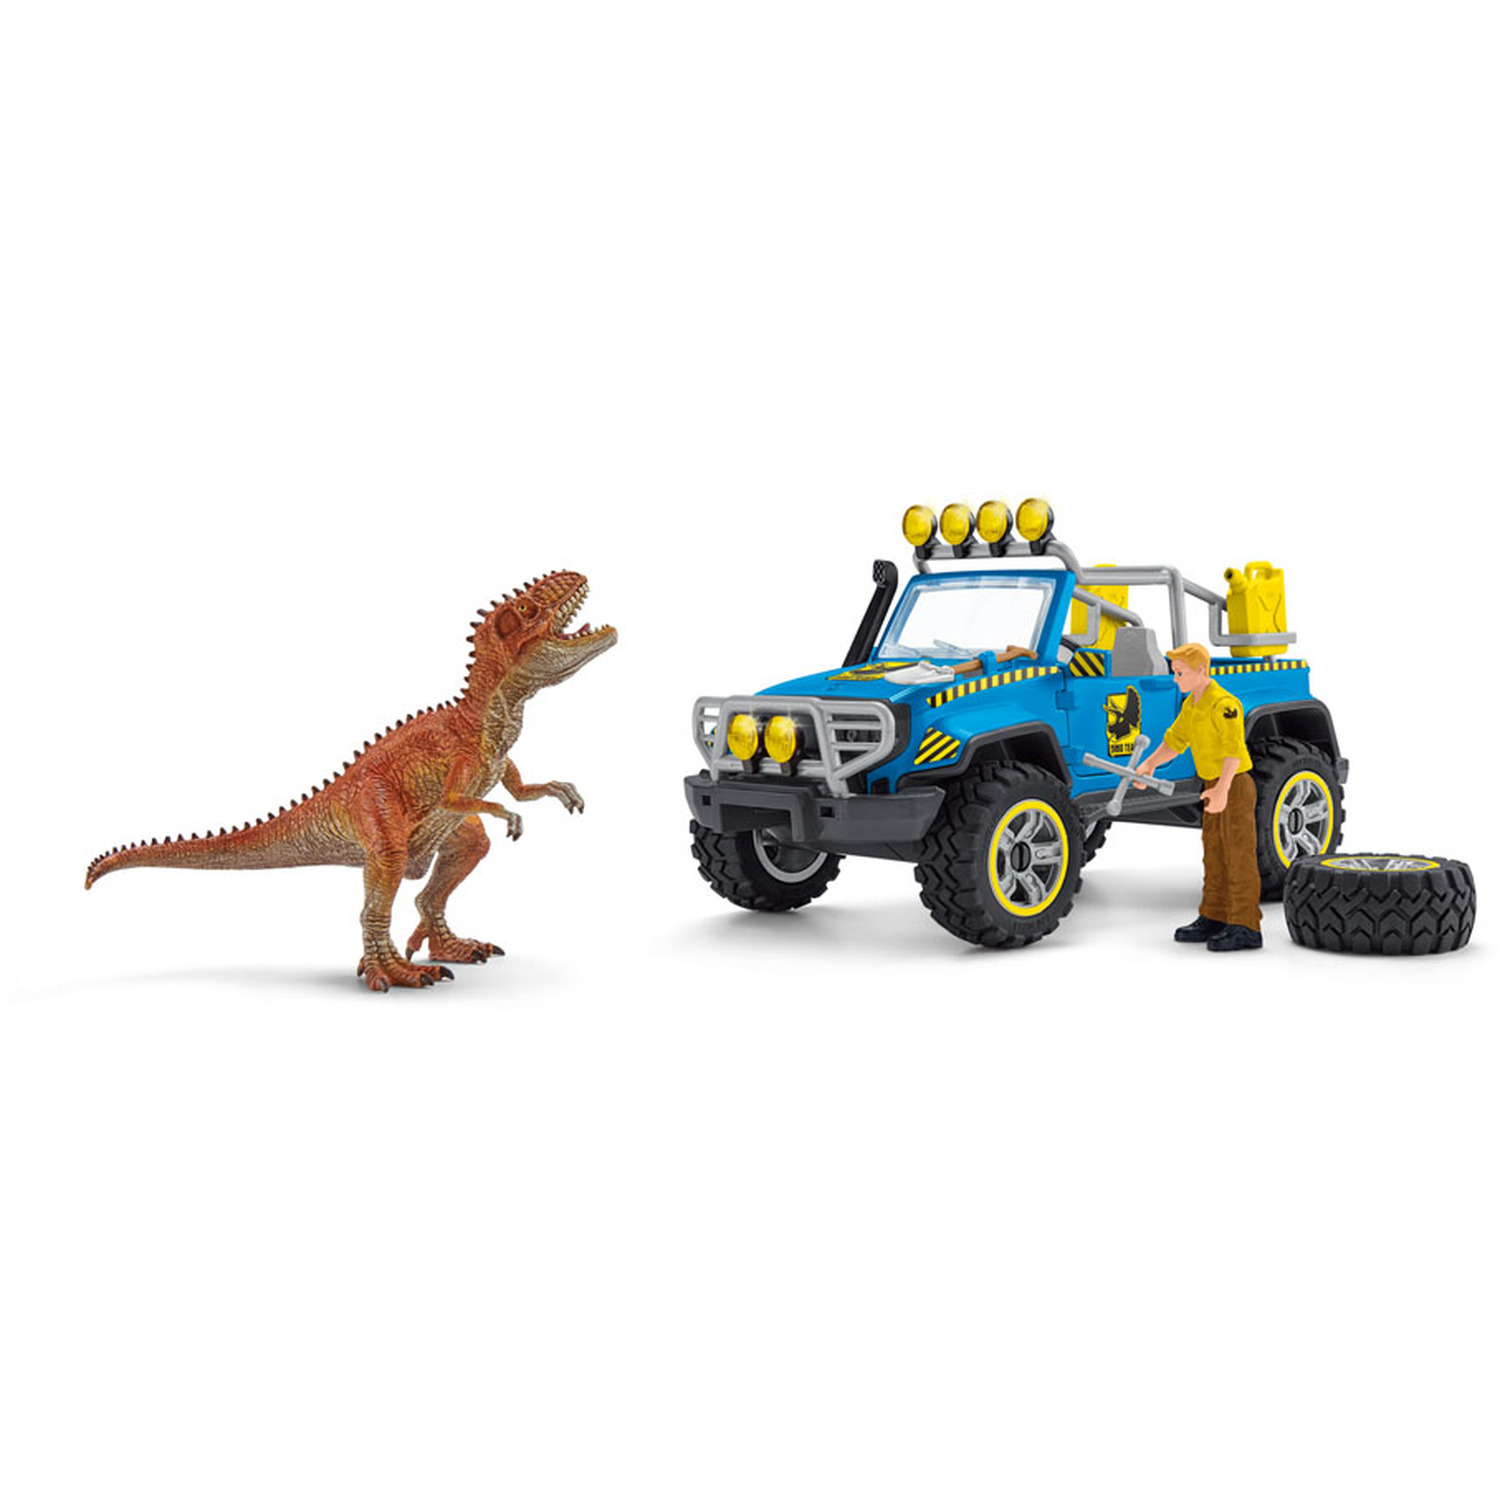 off-road vehicle with dino outpost - schleich dinosaurs - 41464